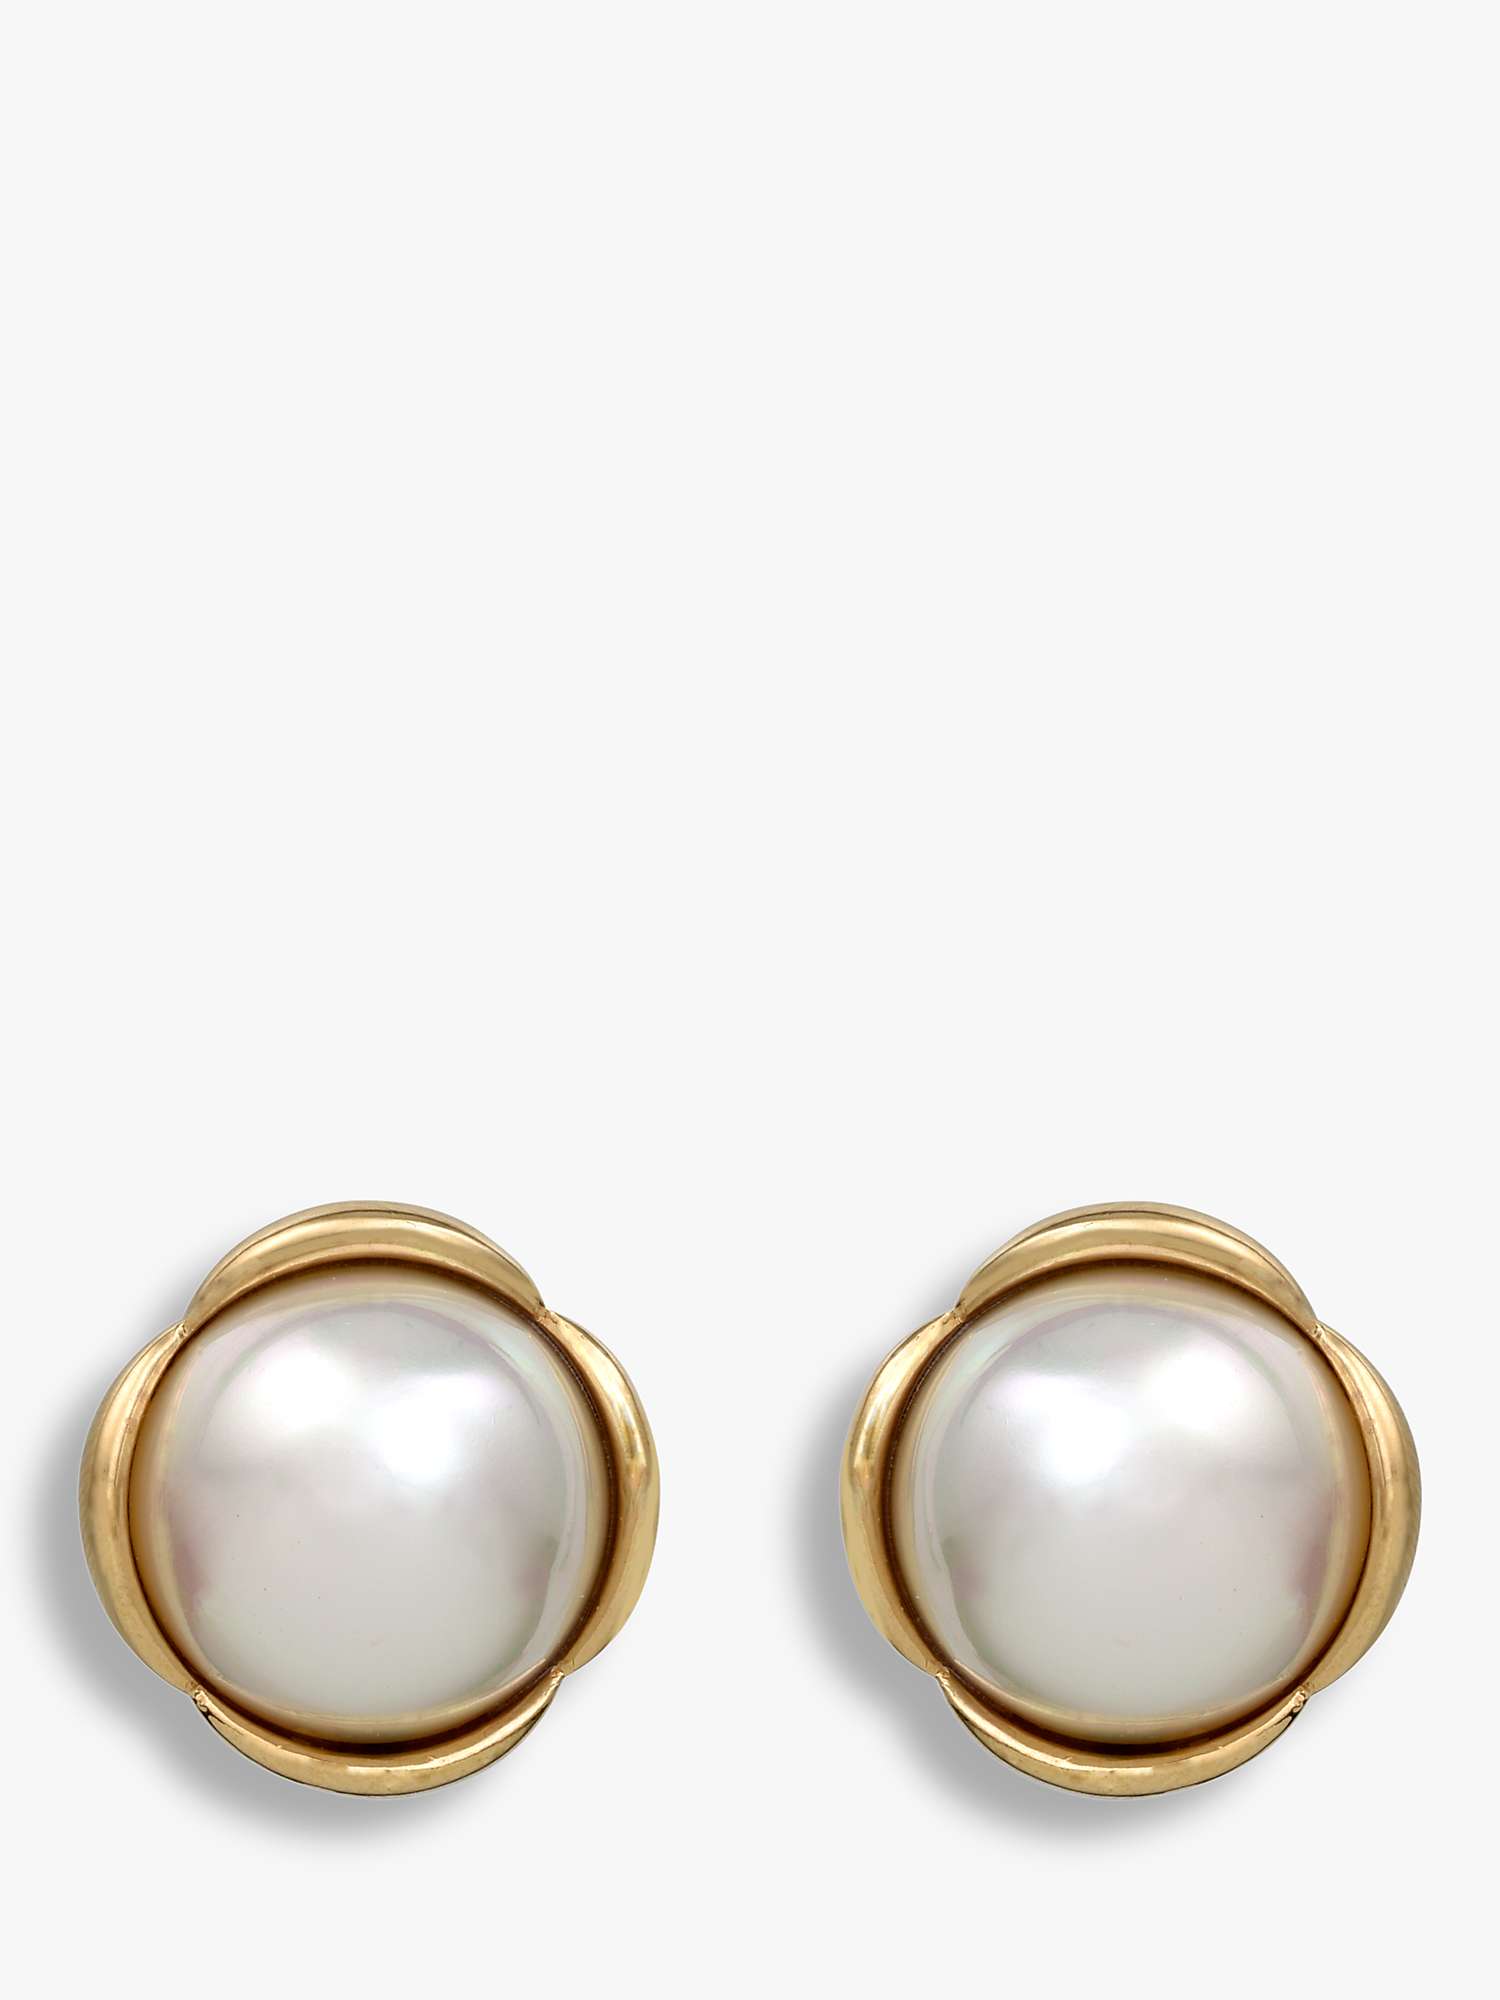 Buy Eclectica Vintage 18ct Gold Plated Faux Pearl Clip-On Earrings, Dated Circa 1990s, Gold Online at johnlewis.com